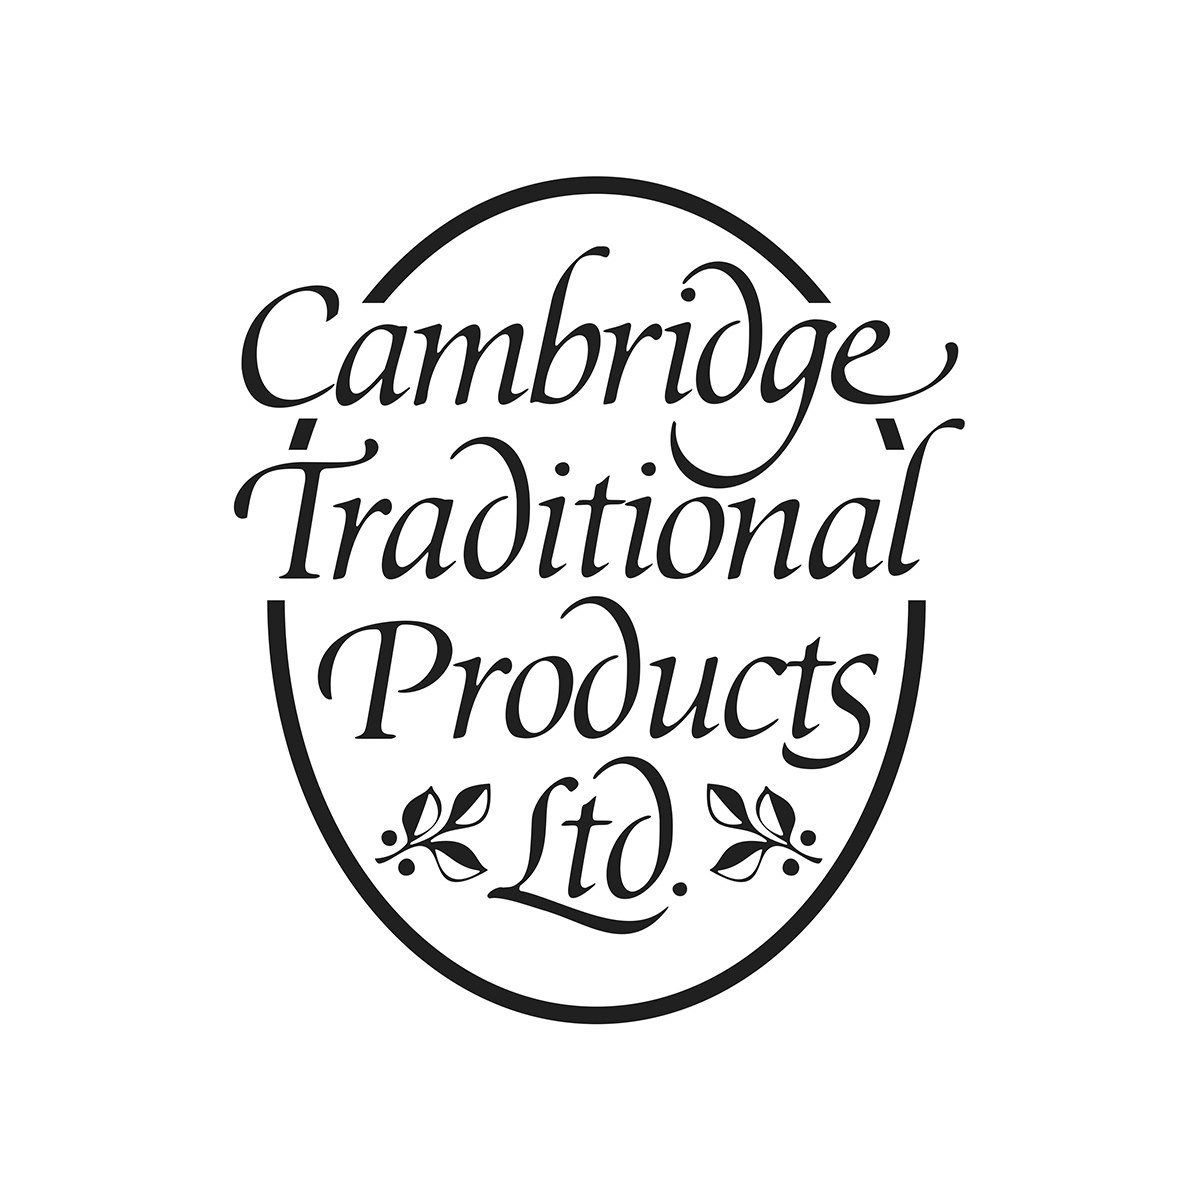 Where to Buy Cambridge Traditional Products